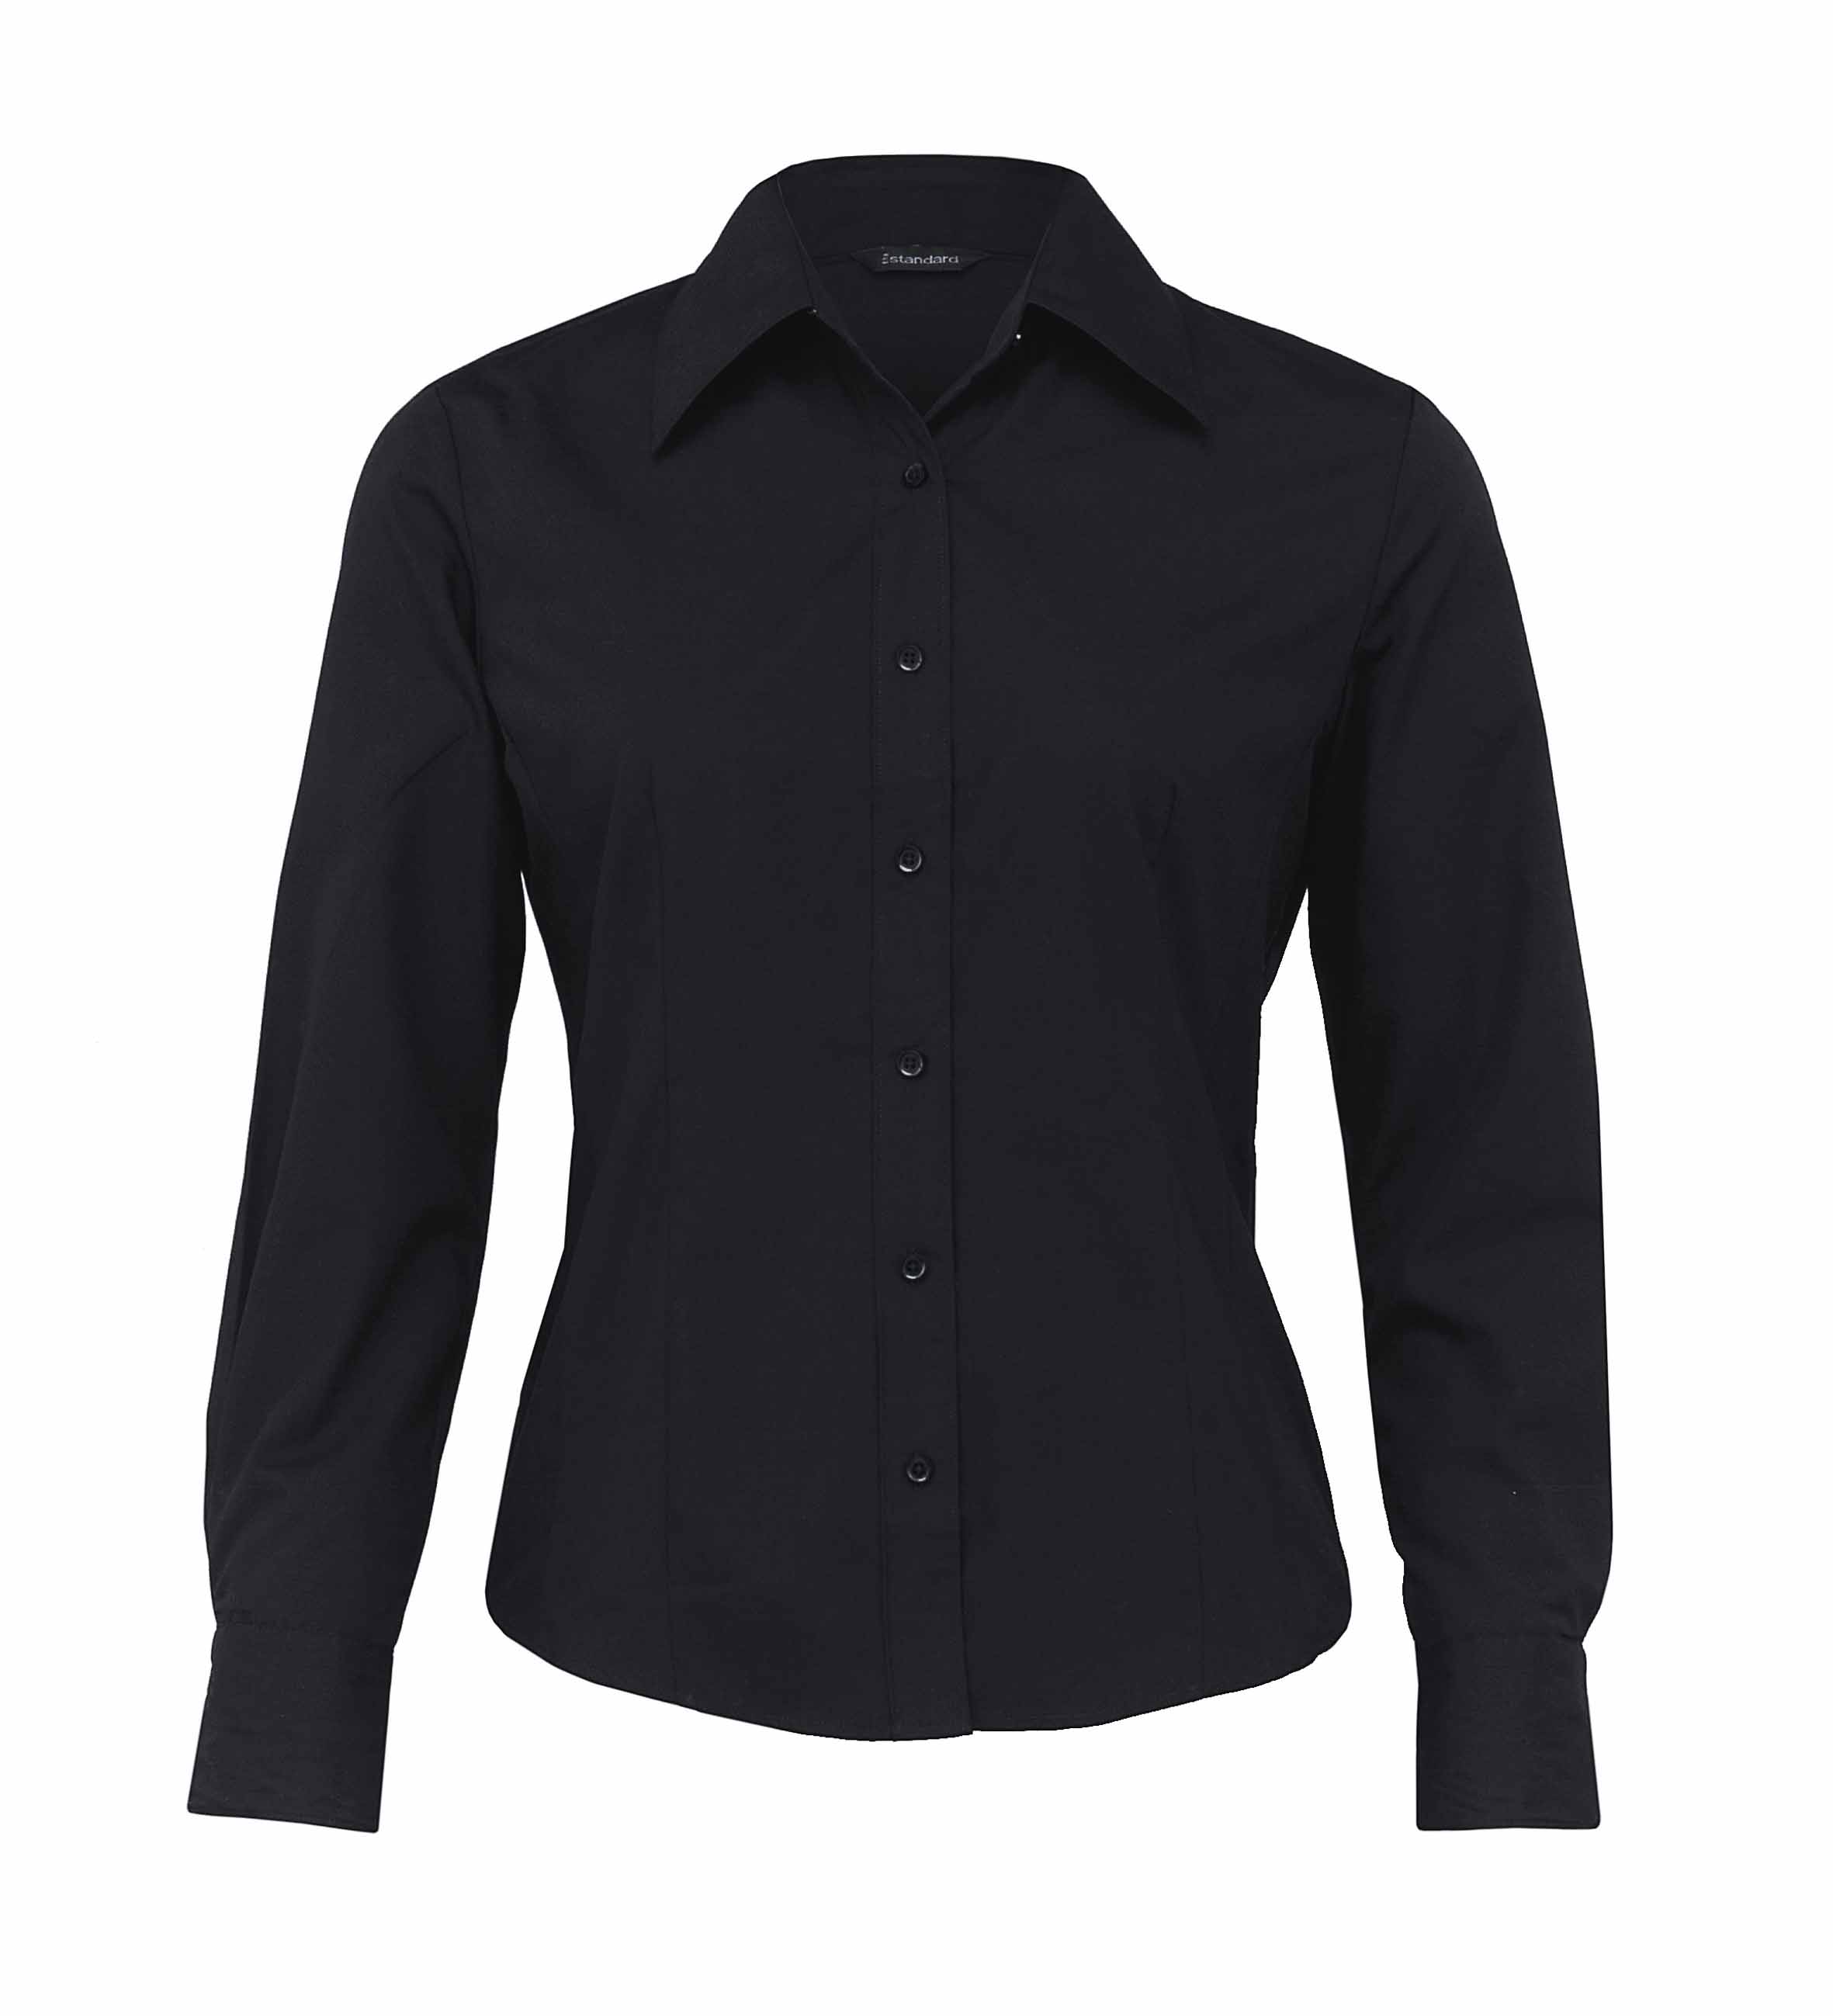 The Traveller Shirt - Womens - Image Group